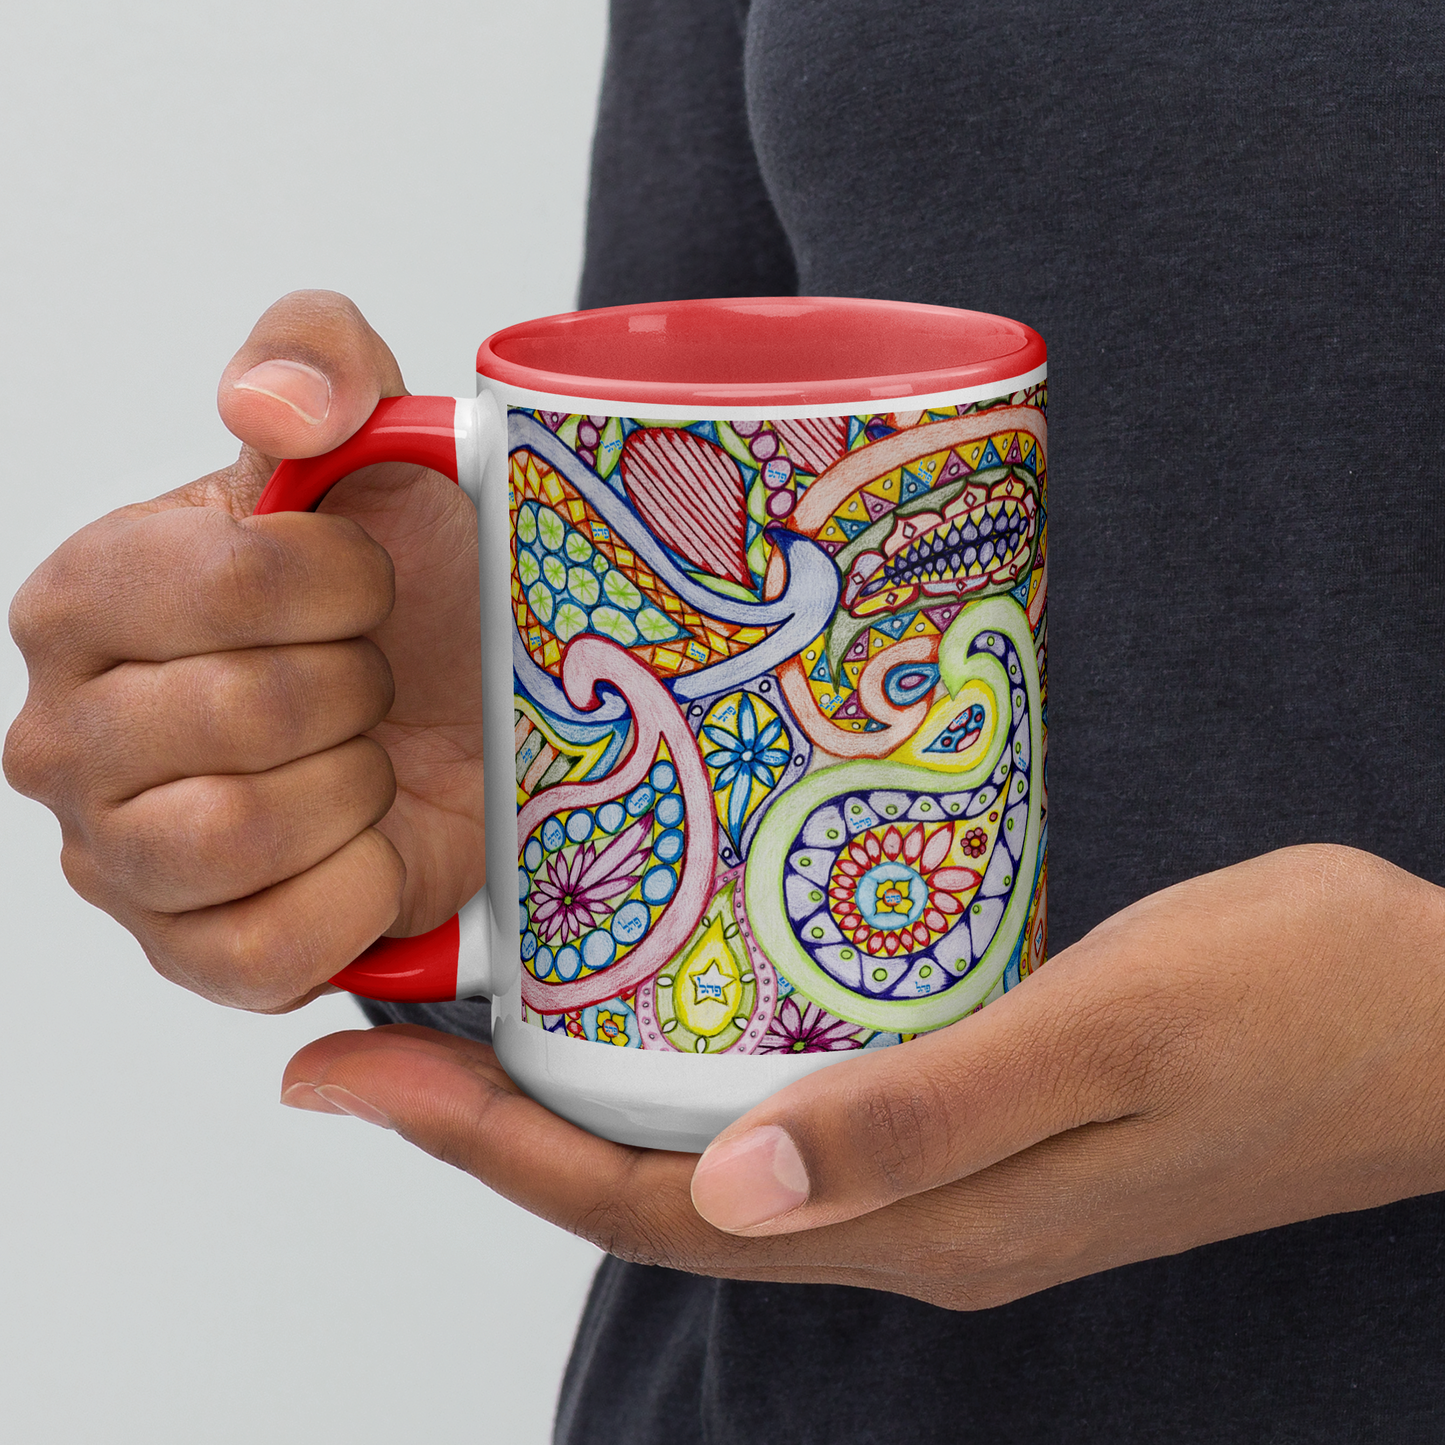  Mug-with-Color-Inside-15oz-Red-Remove-Addictions-(72-Names-of-God-Pey-Hey-Lamed)-8-137online.com